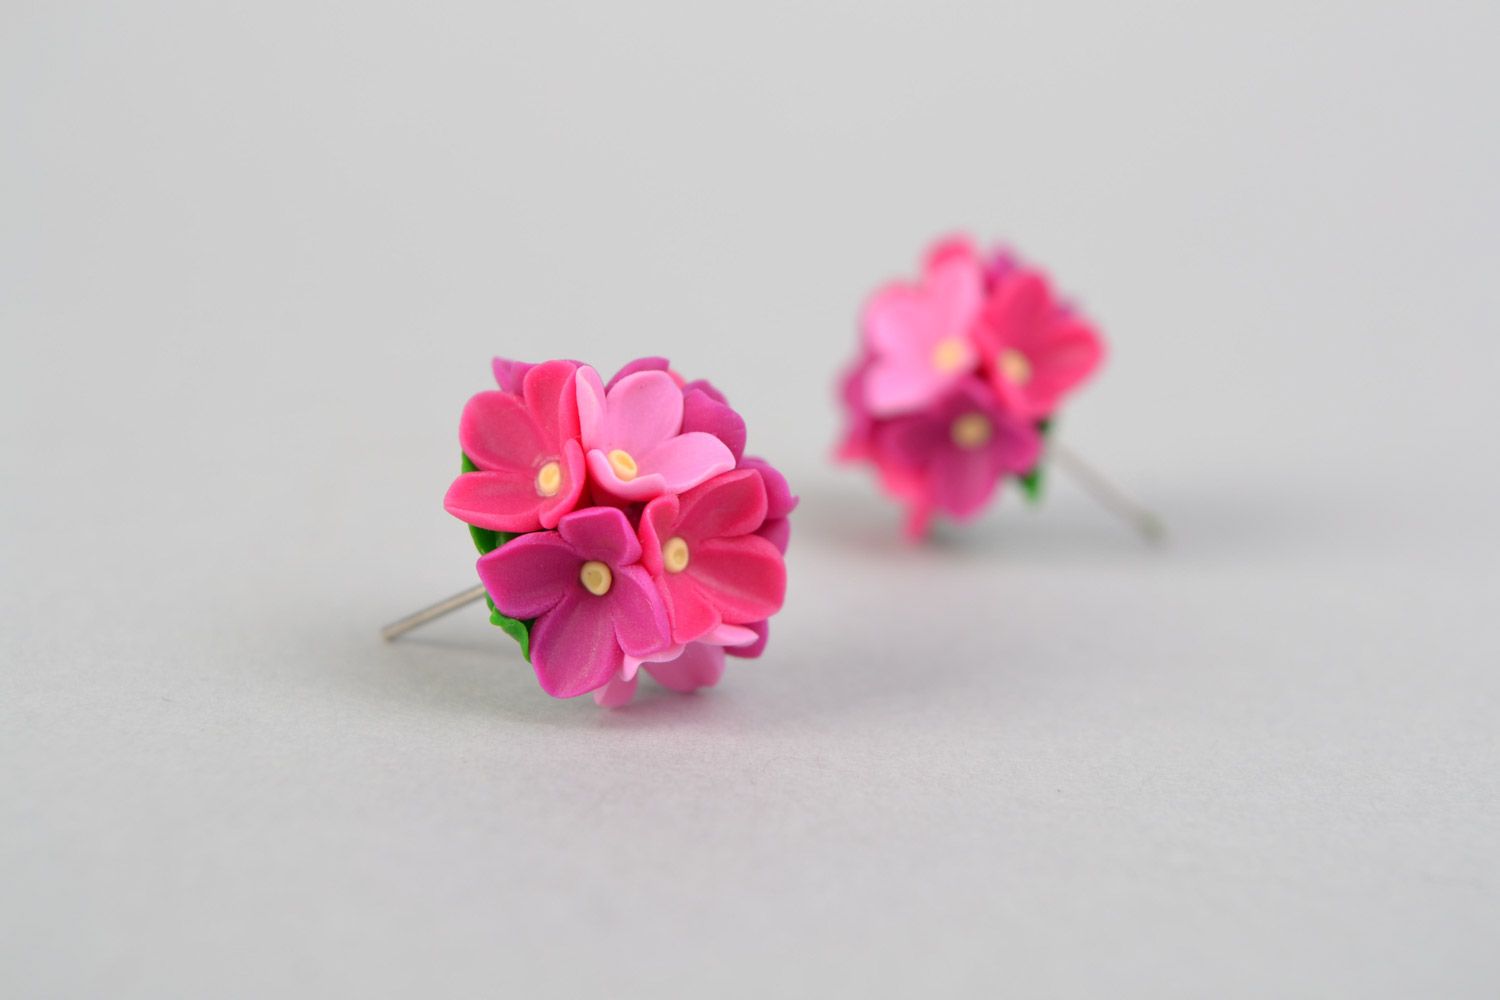 Homemade polymer clay stud earrings with lilac flower bouquets for ladies photo 4